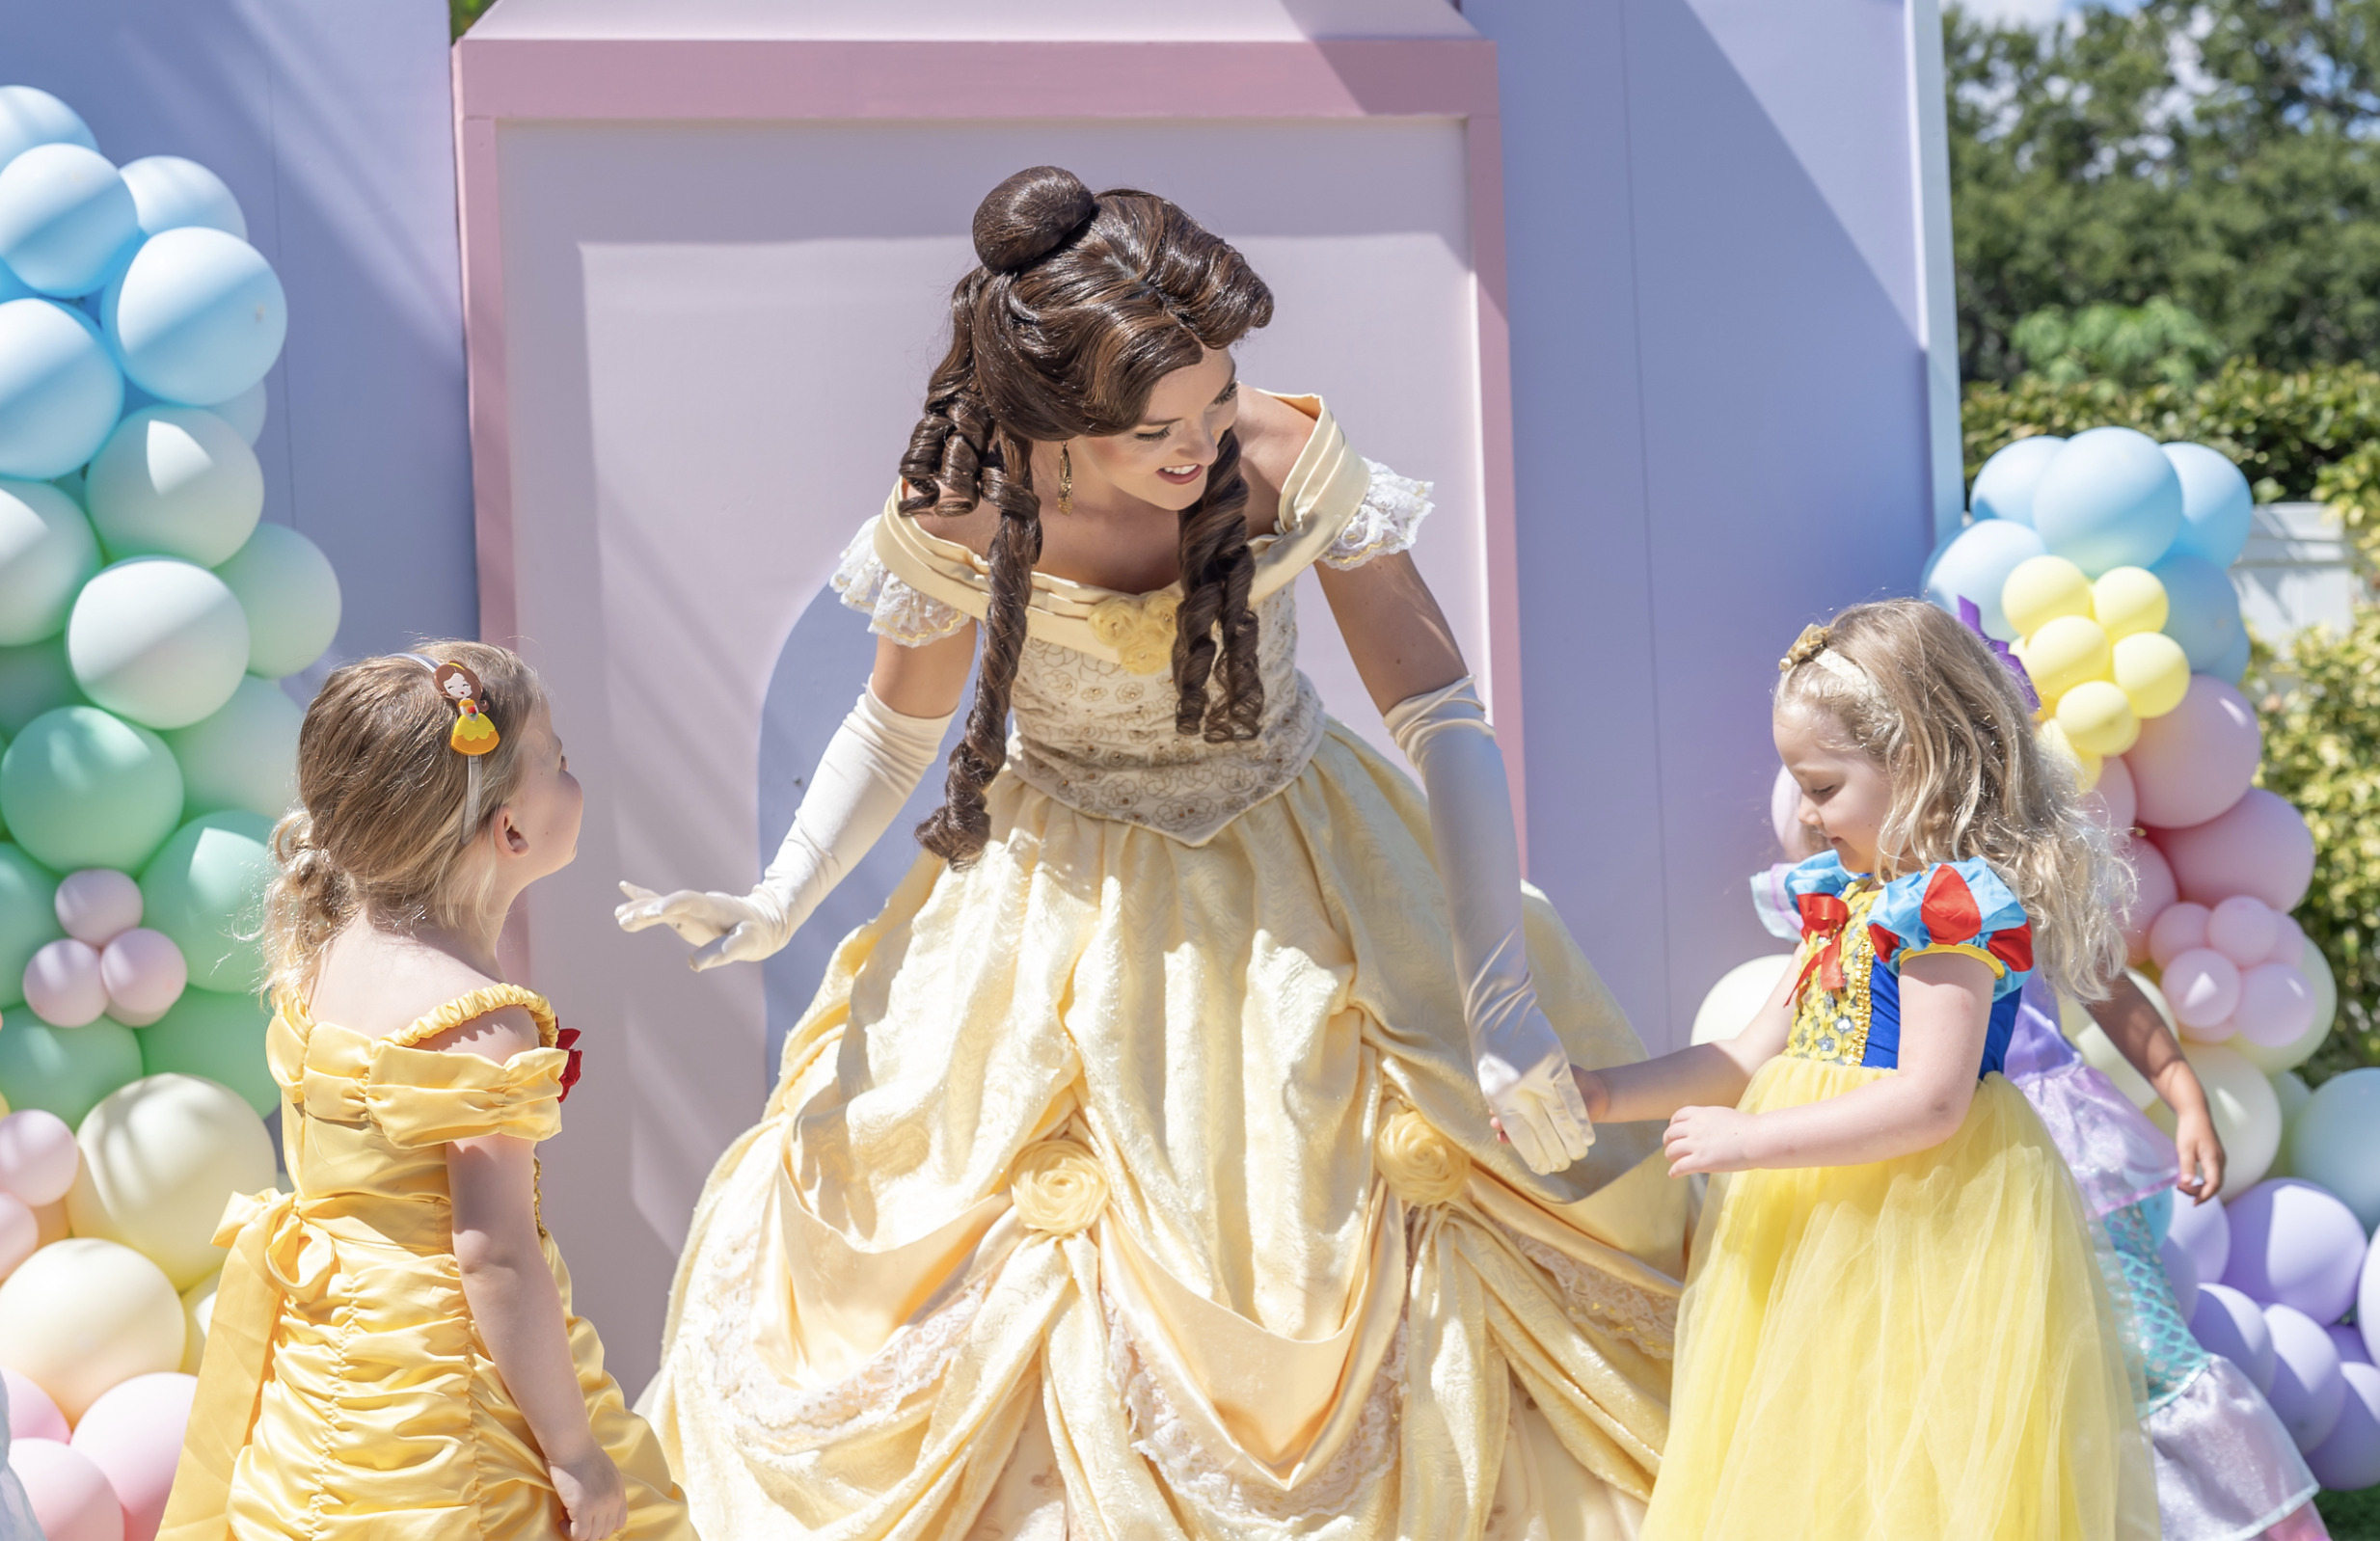 Hire Belle for Magical Birthday Parties in Tampa Parties with Character